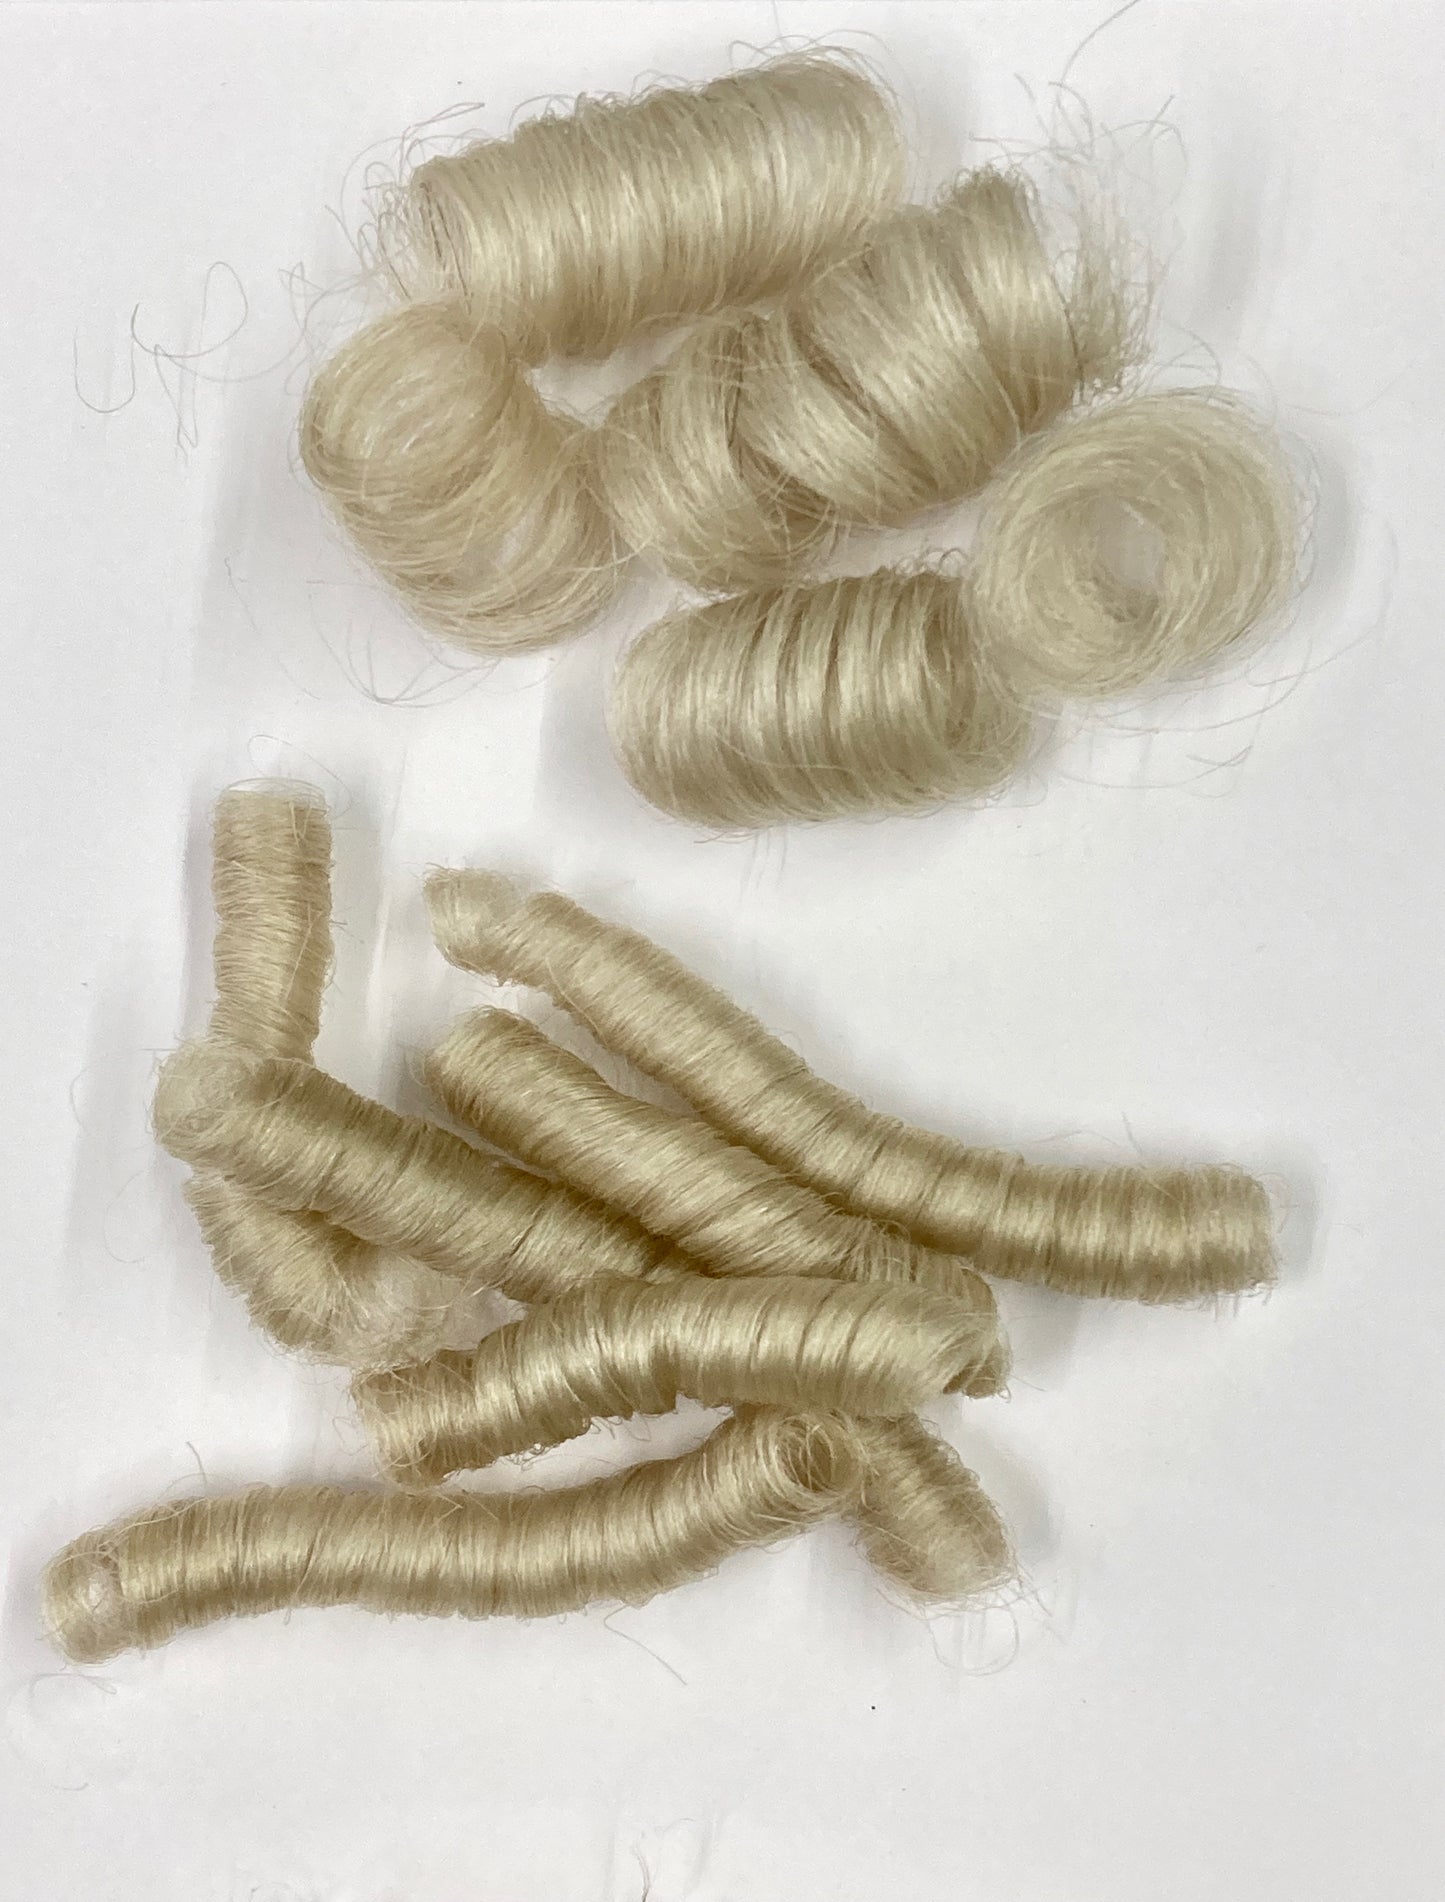 872. Natural White Permanently Curled Yak - Various Curl Sizes and Hair Lengths